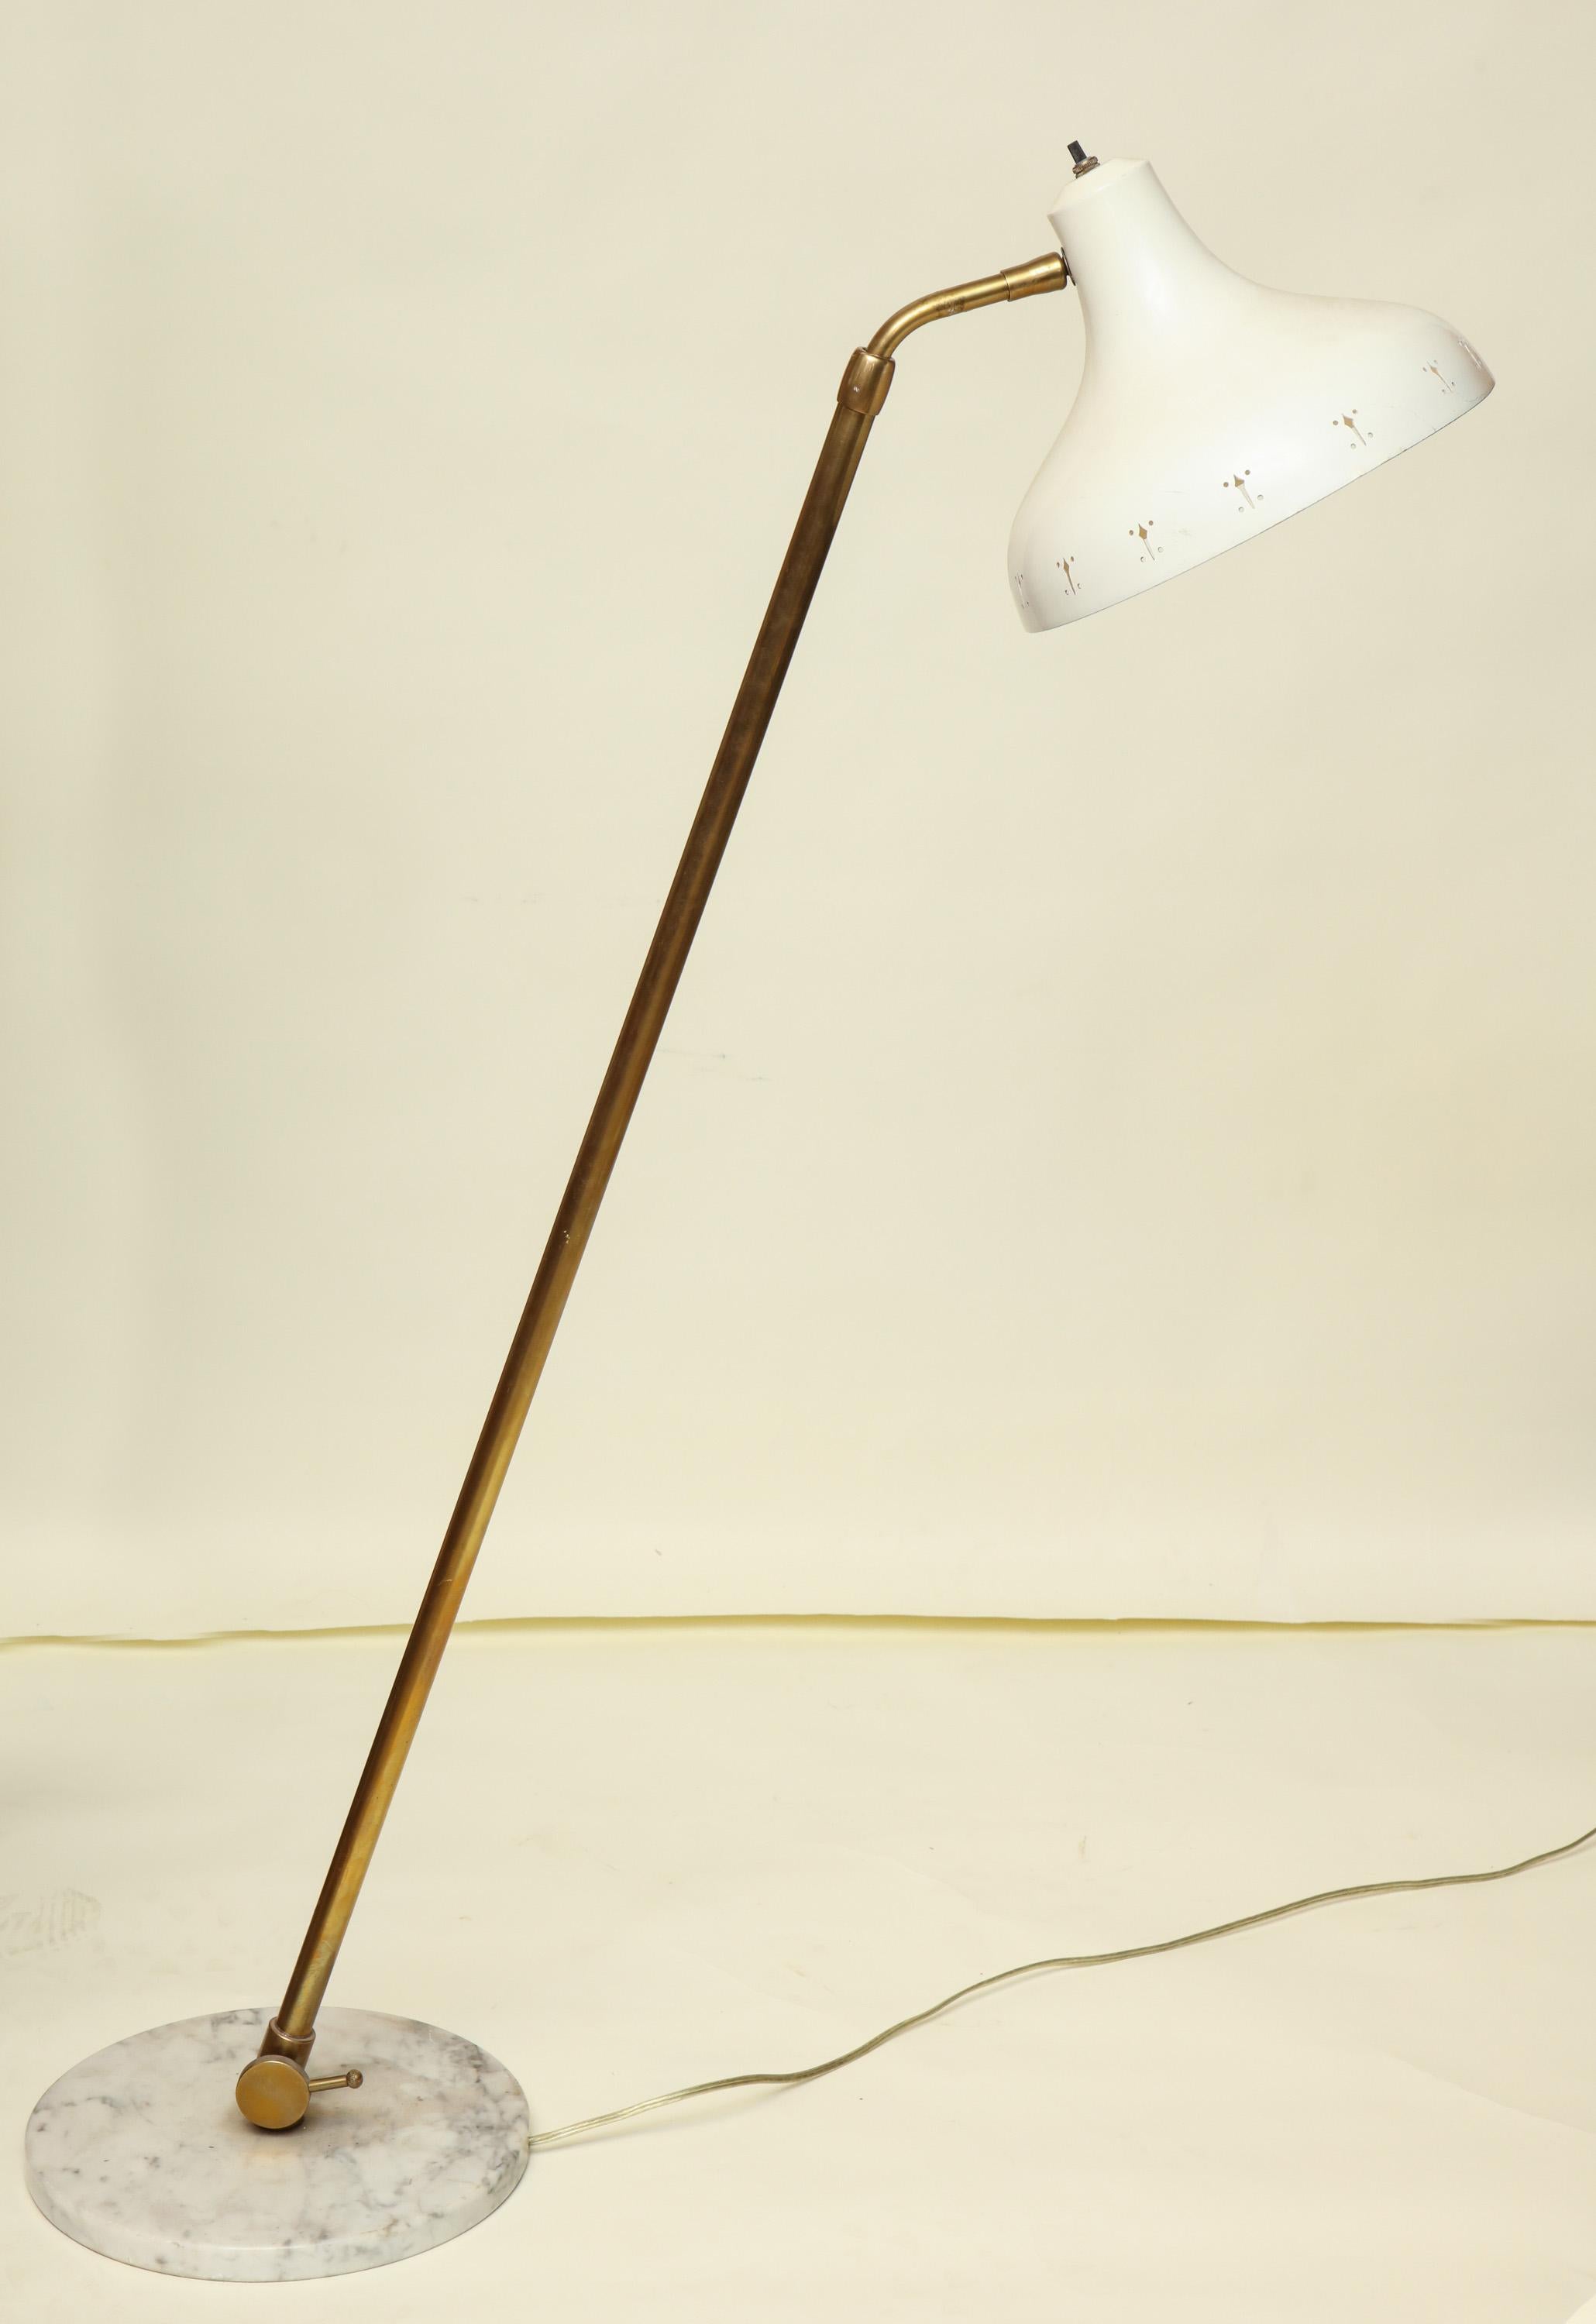 An articulated floor lamp Mid-Century Modern shade arm and height adjusts from 43